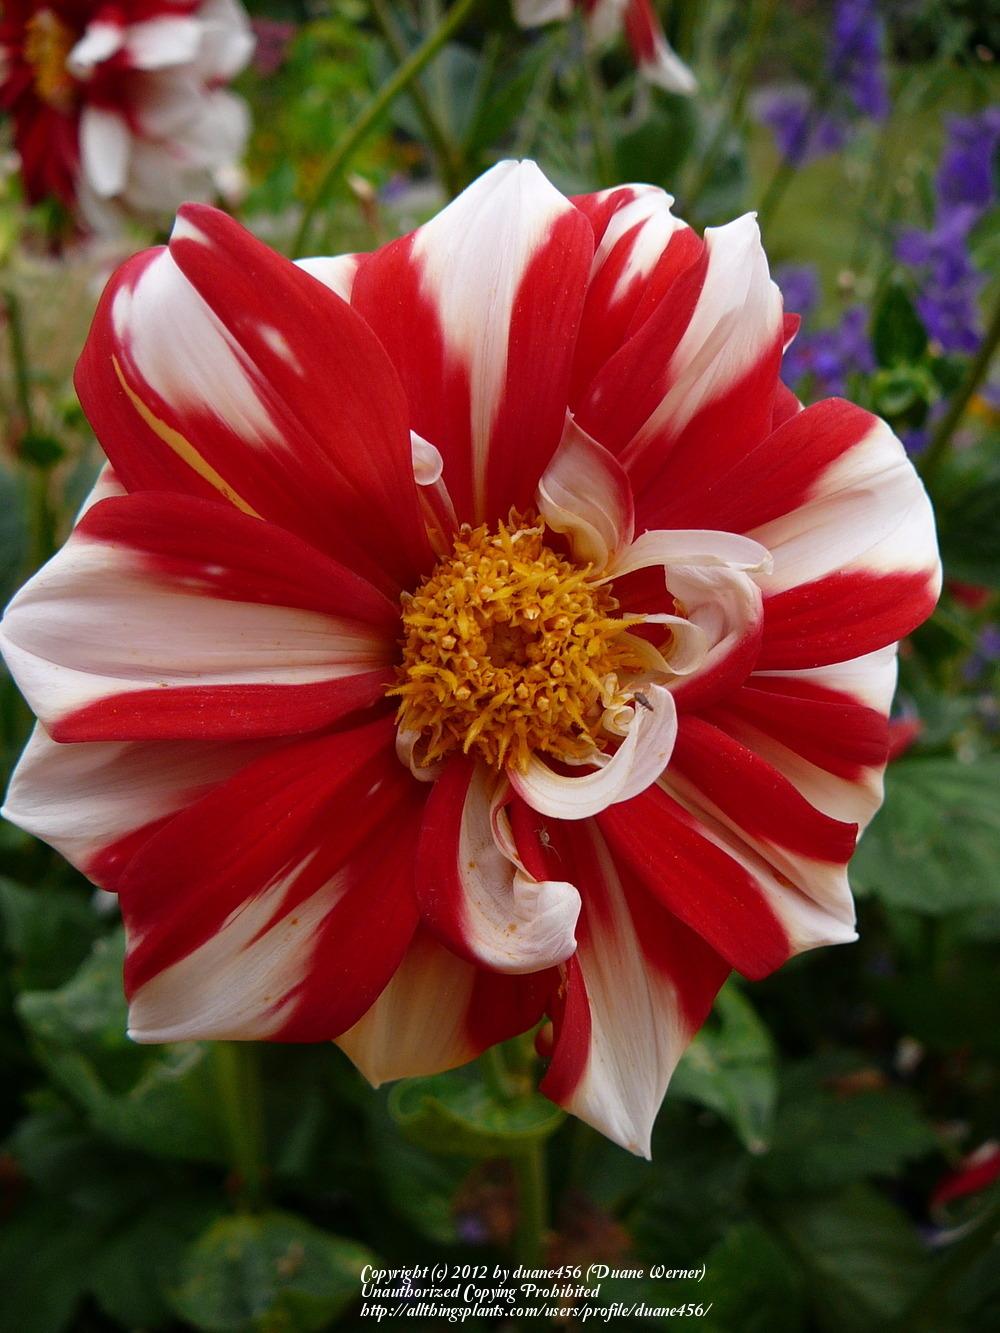 Photo of Dahlia 'Fire and Ice' uploaded by duane456